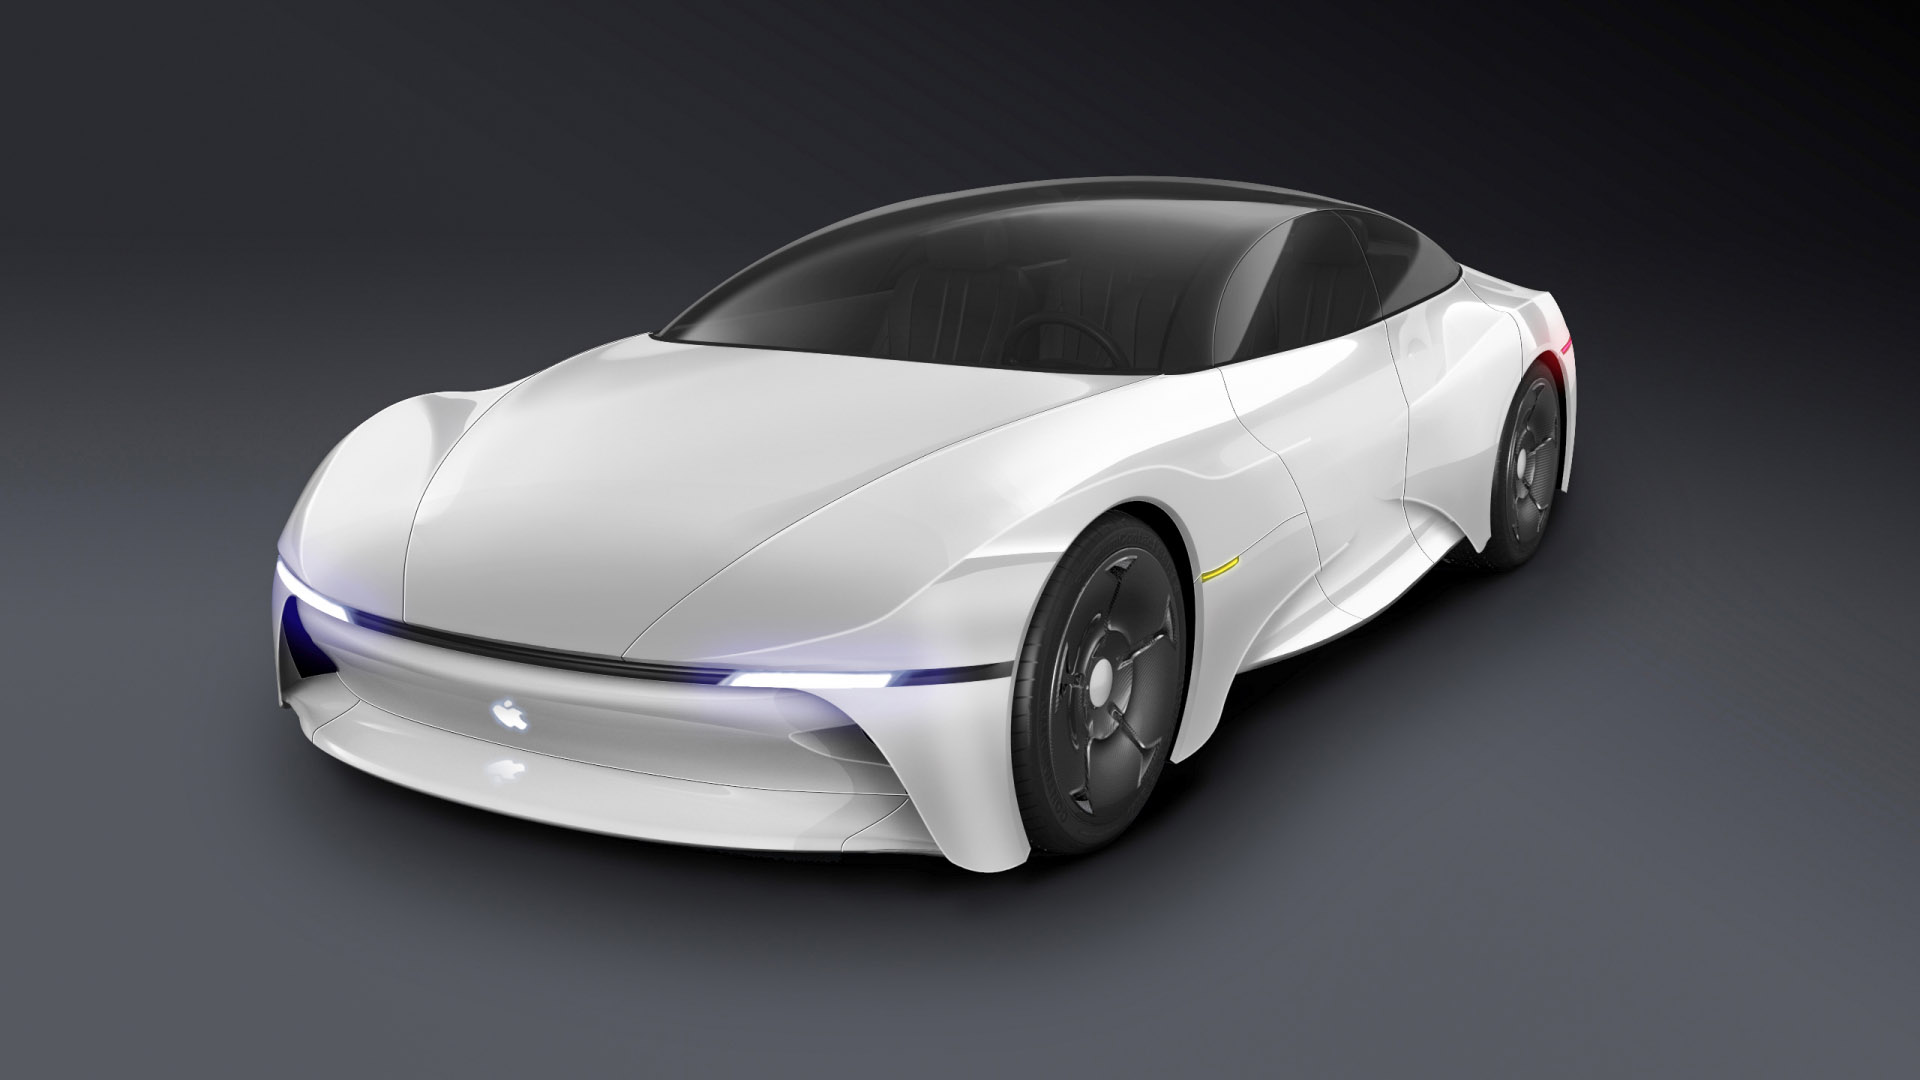 Apple Car Secret Project Exposed, Engineer's Betrayal Unveils Self-Driving Car Tech Theft